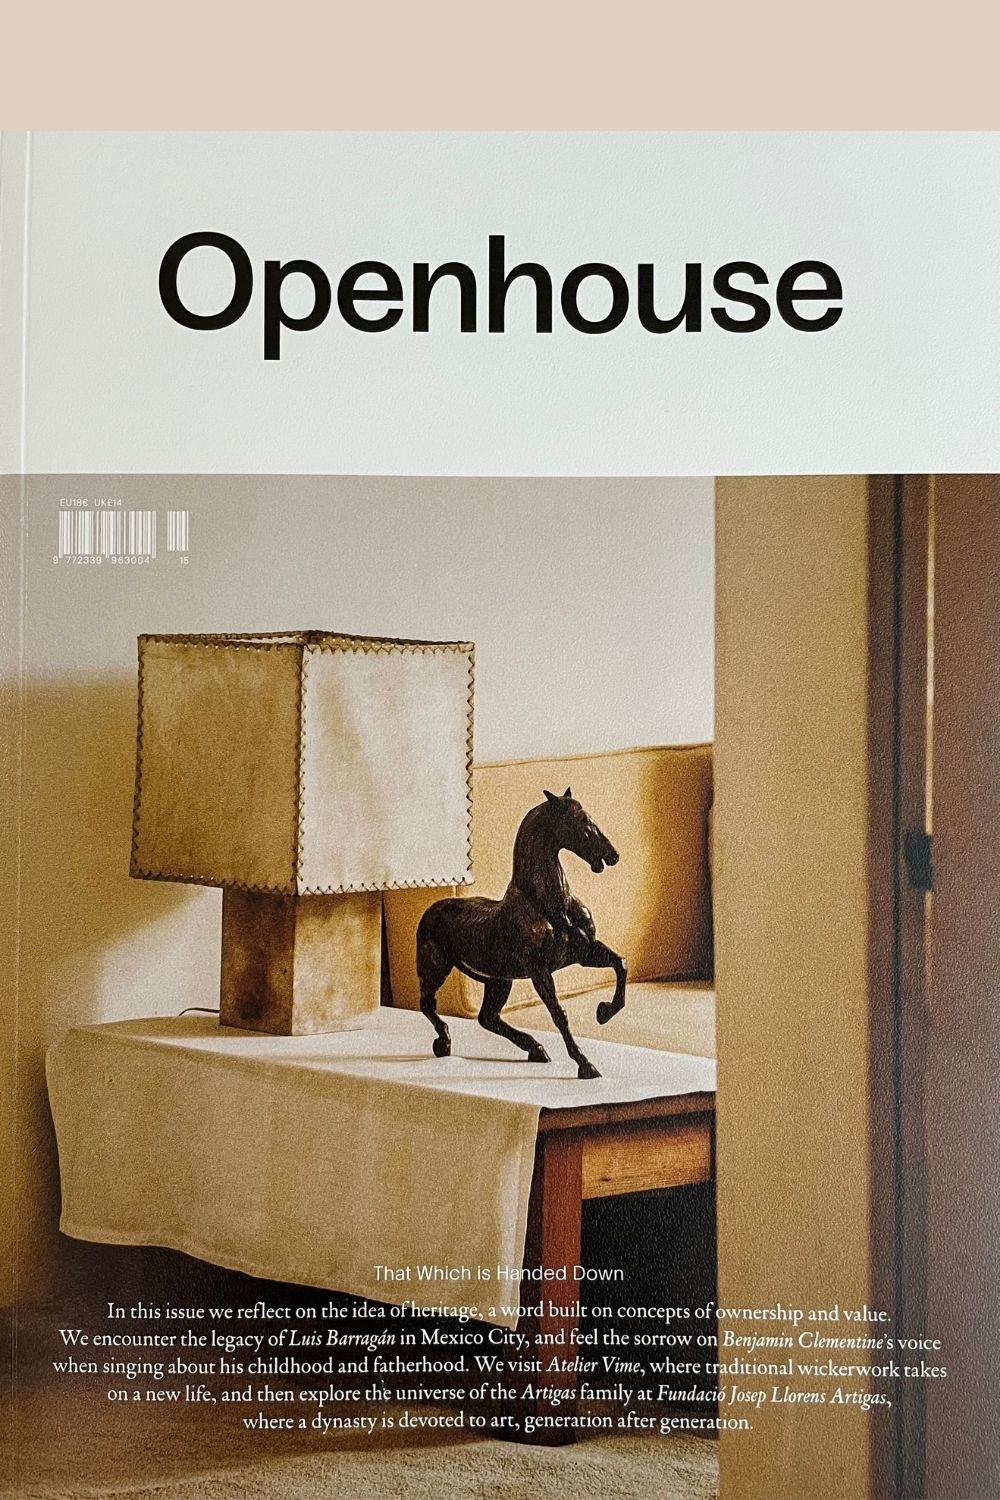 Front cover of Openhouse magazine Issue 15